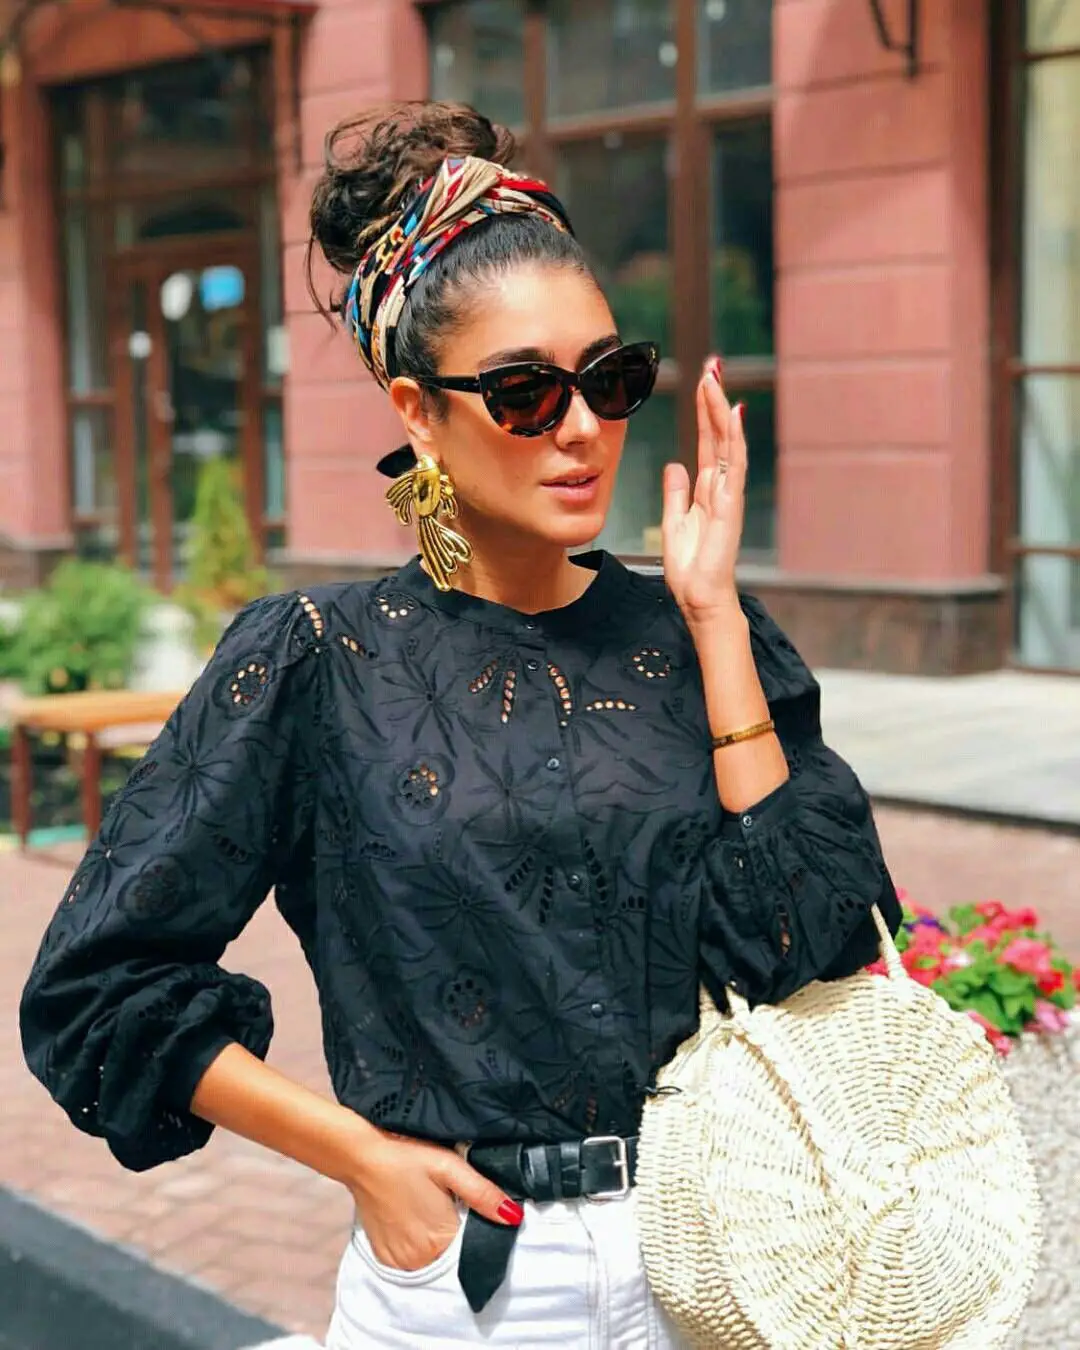 35-beautiful-scarf-in-hair-ideas-trending-styles-to-try Vintage Top Knot And Scarf Tie